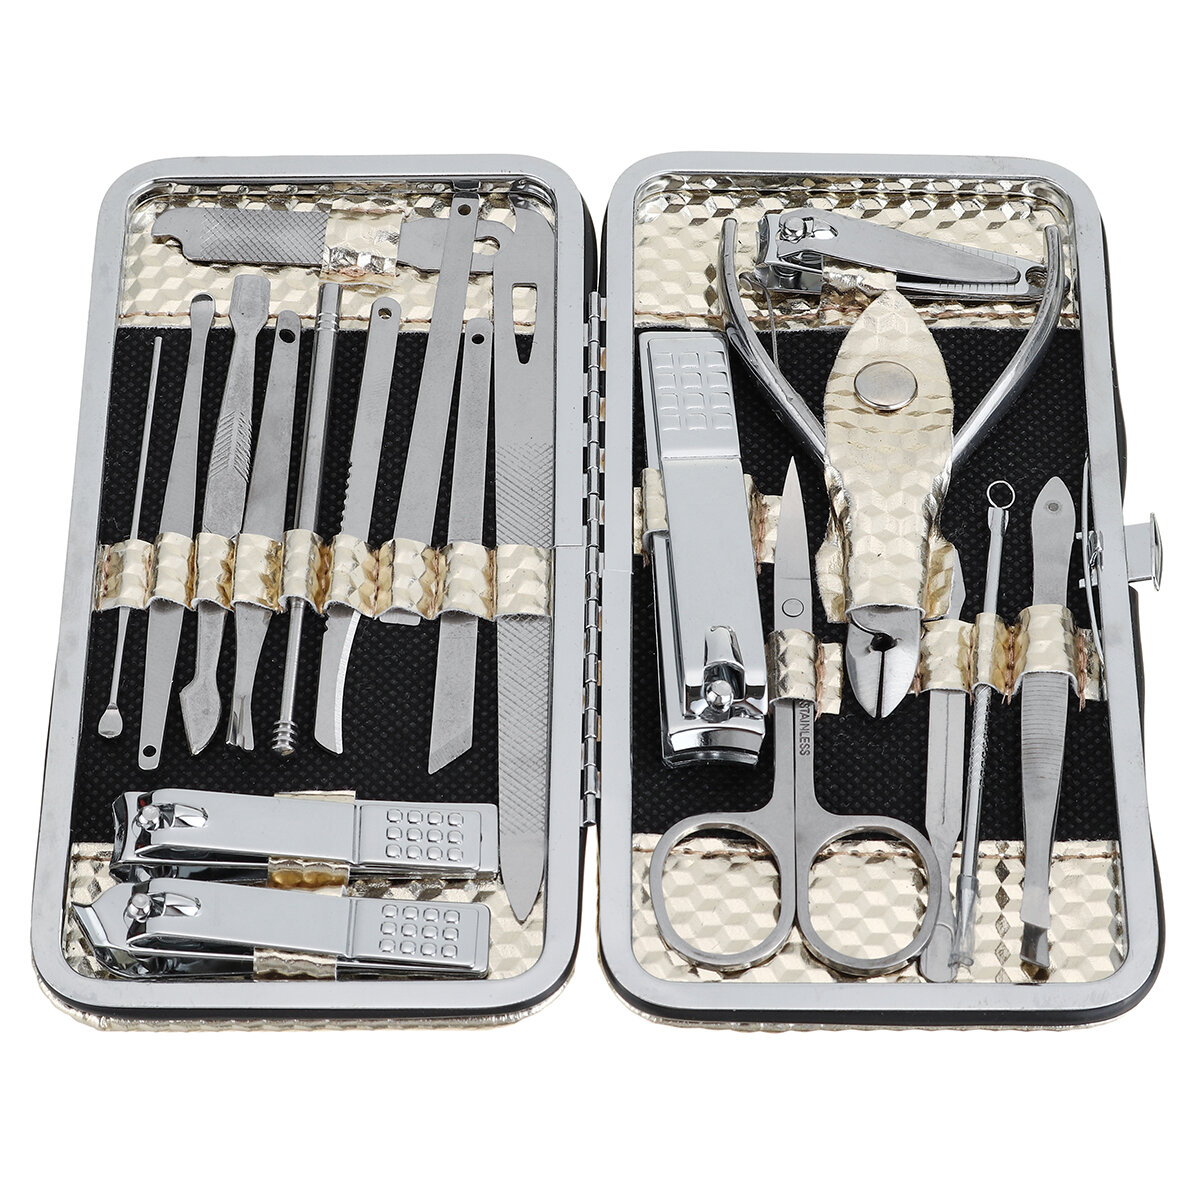 19PCS Stainless Steel Nail Clippers Pedicure Manicure Set Cleaner Cuticle Grooming Kit